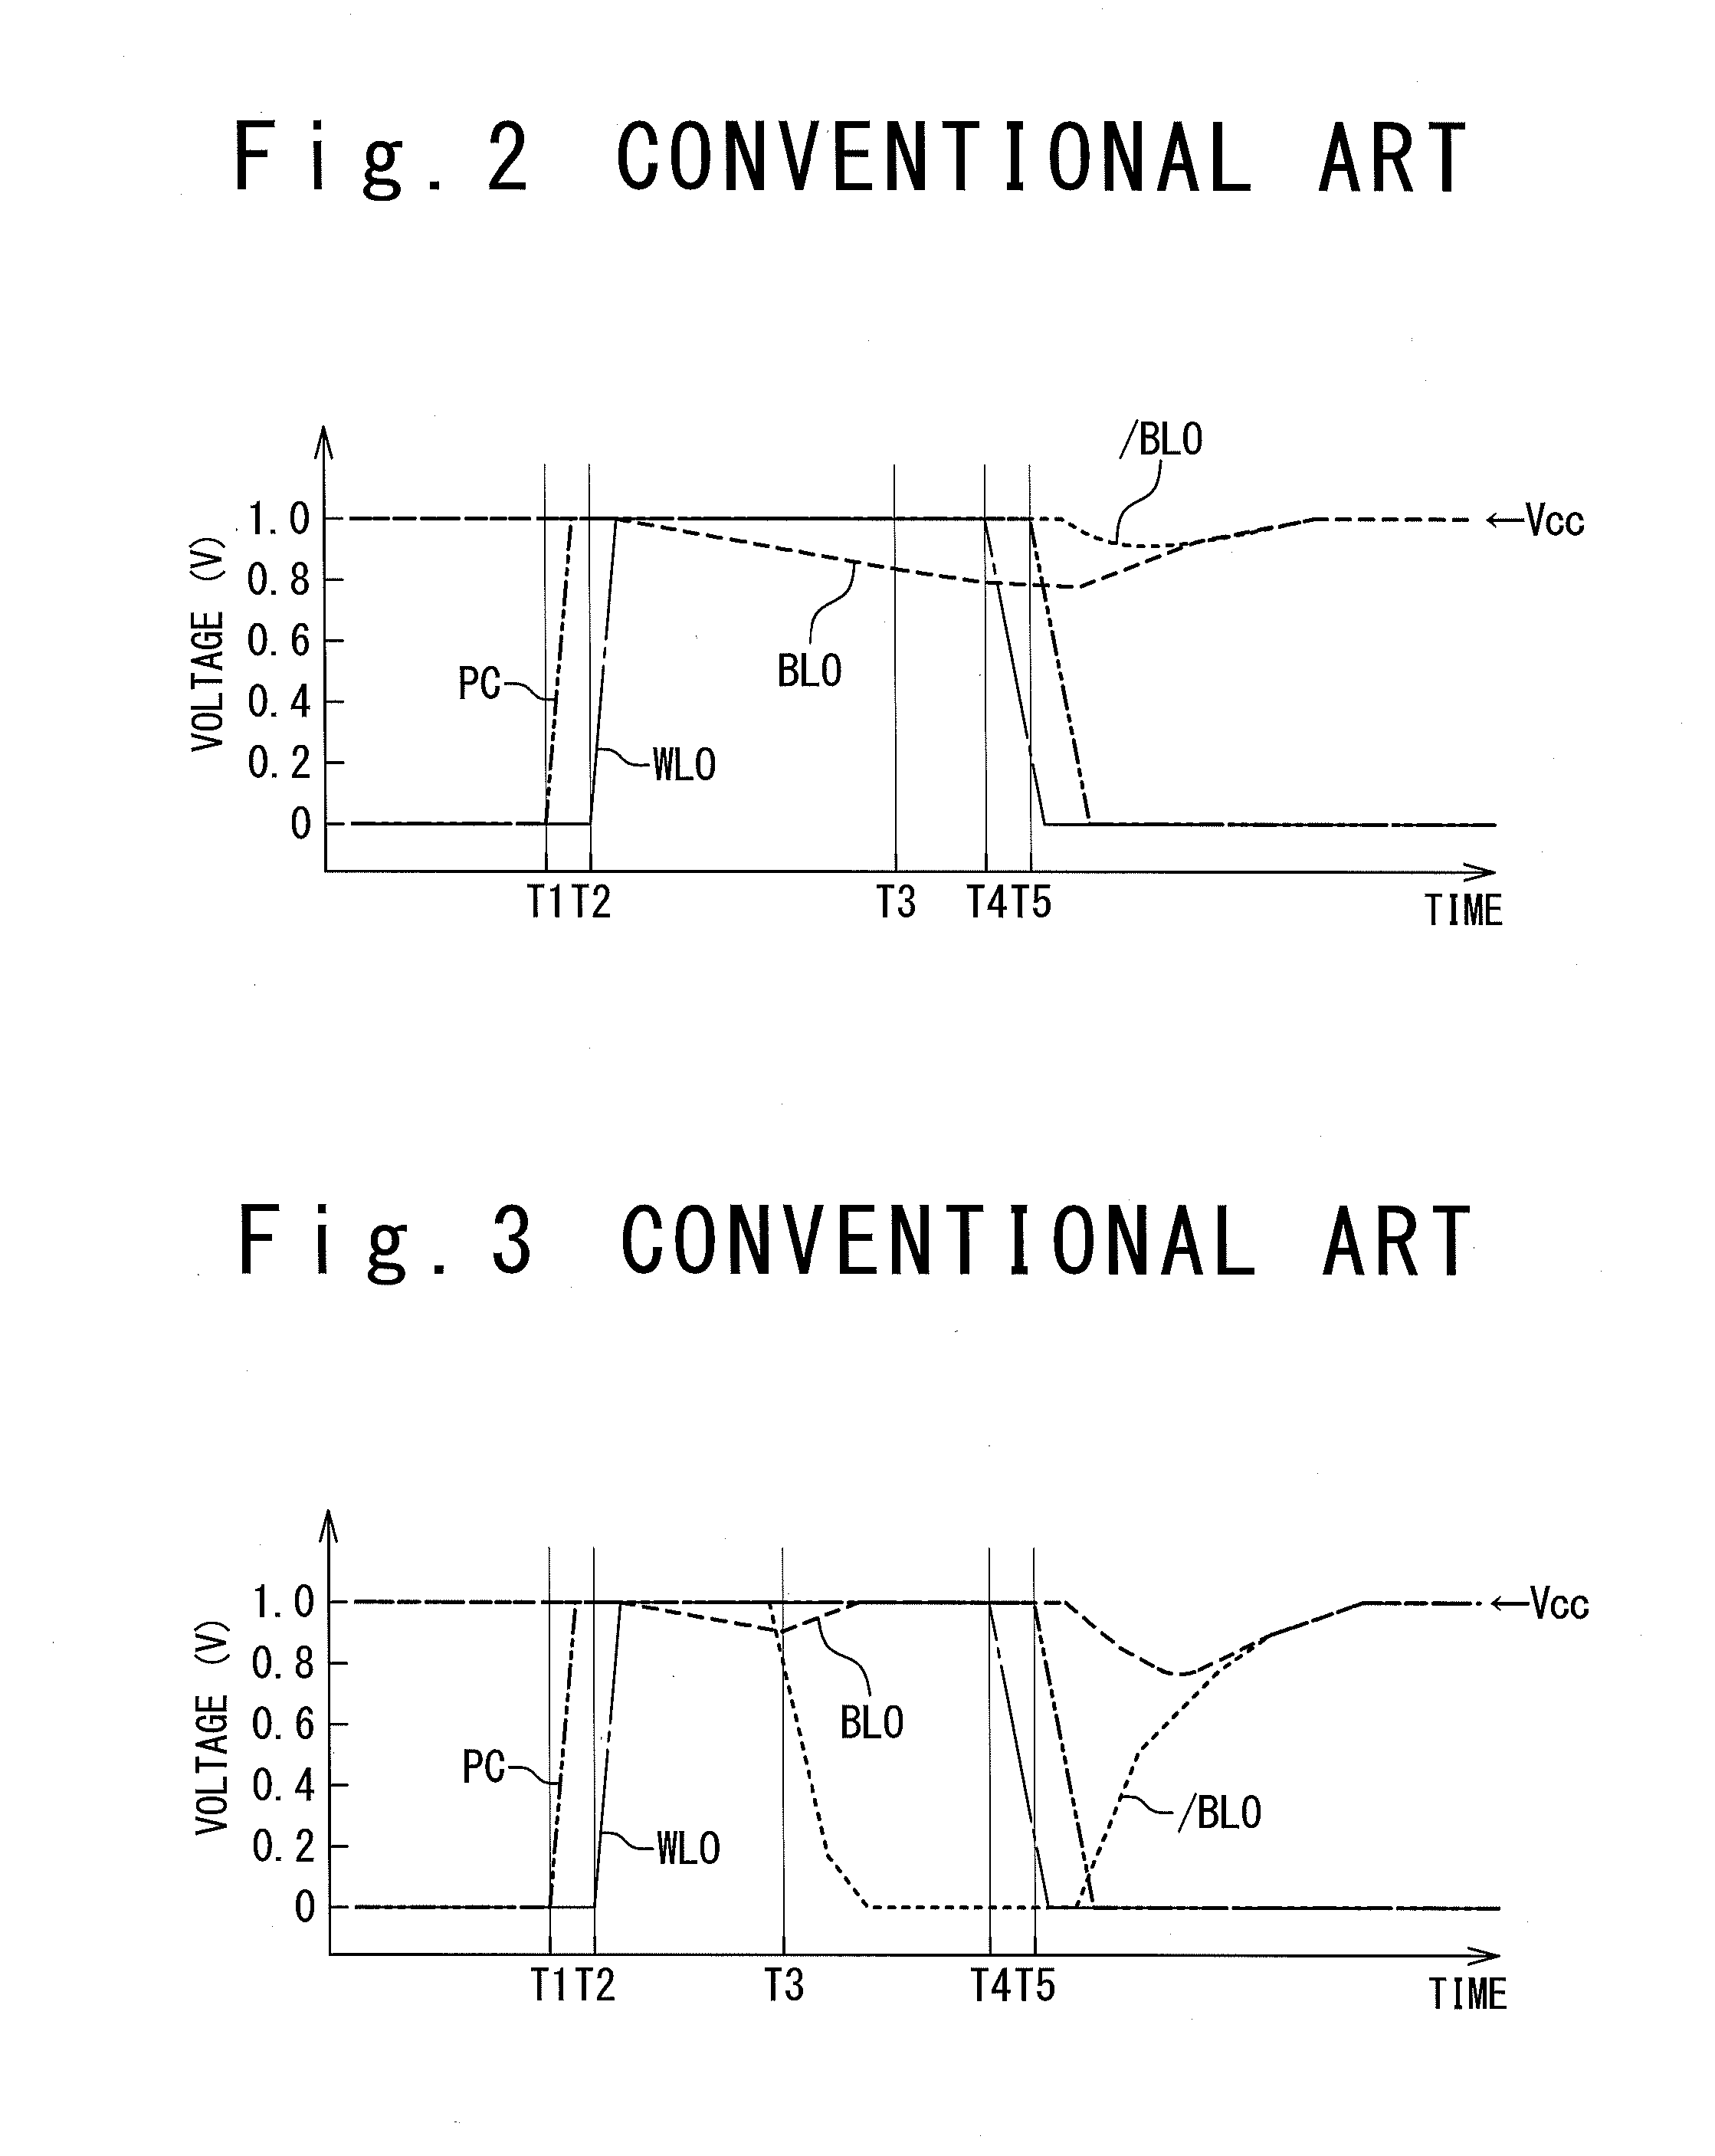 SRAM and method for accessing SRAM